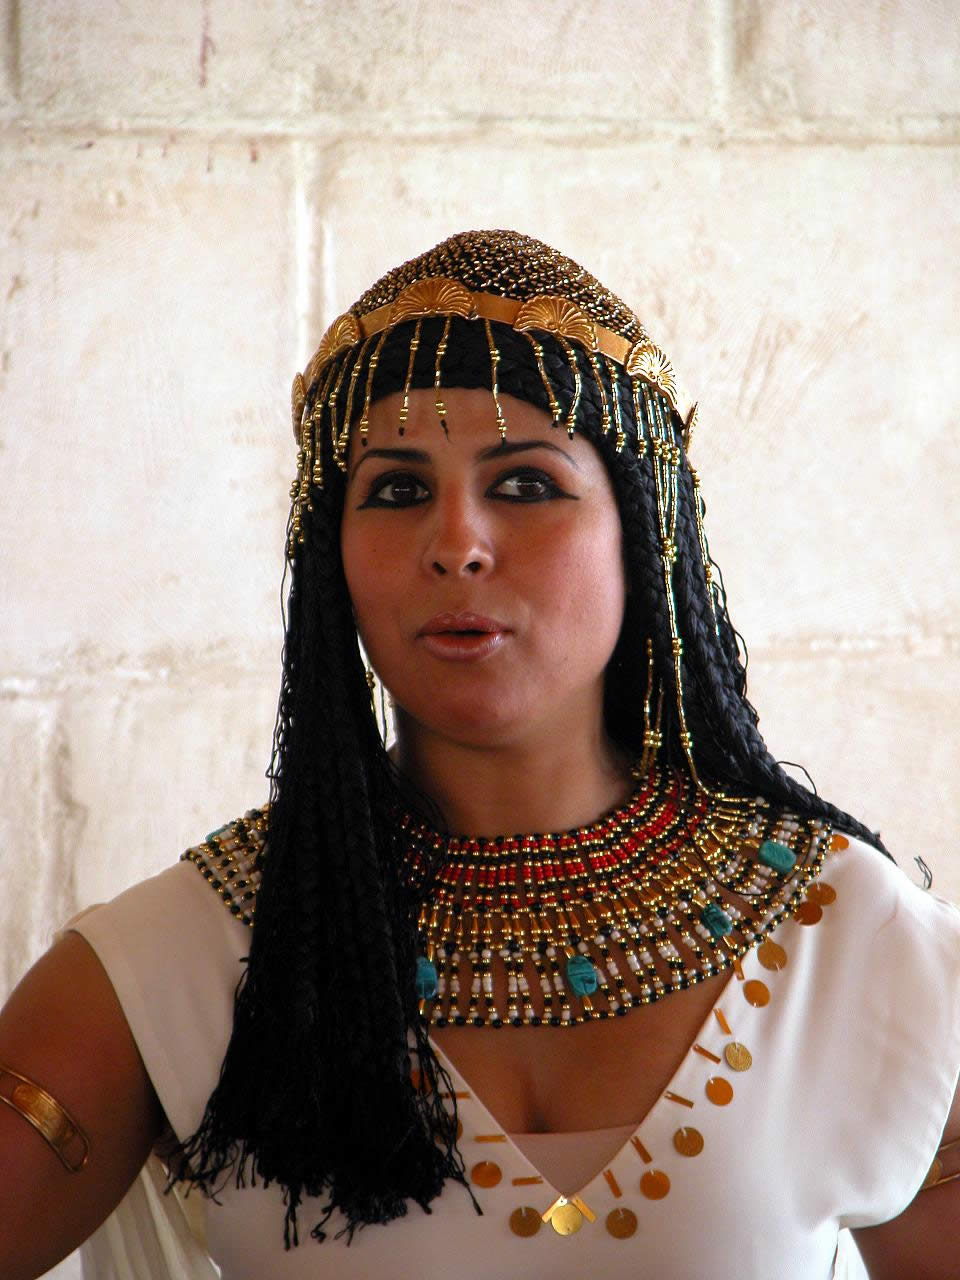 50 Professional Photographs Showing the Culture of Egypt 24